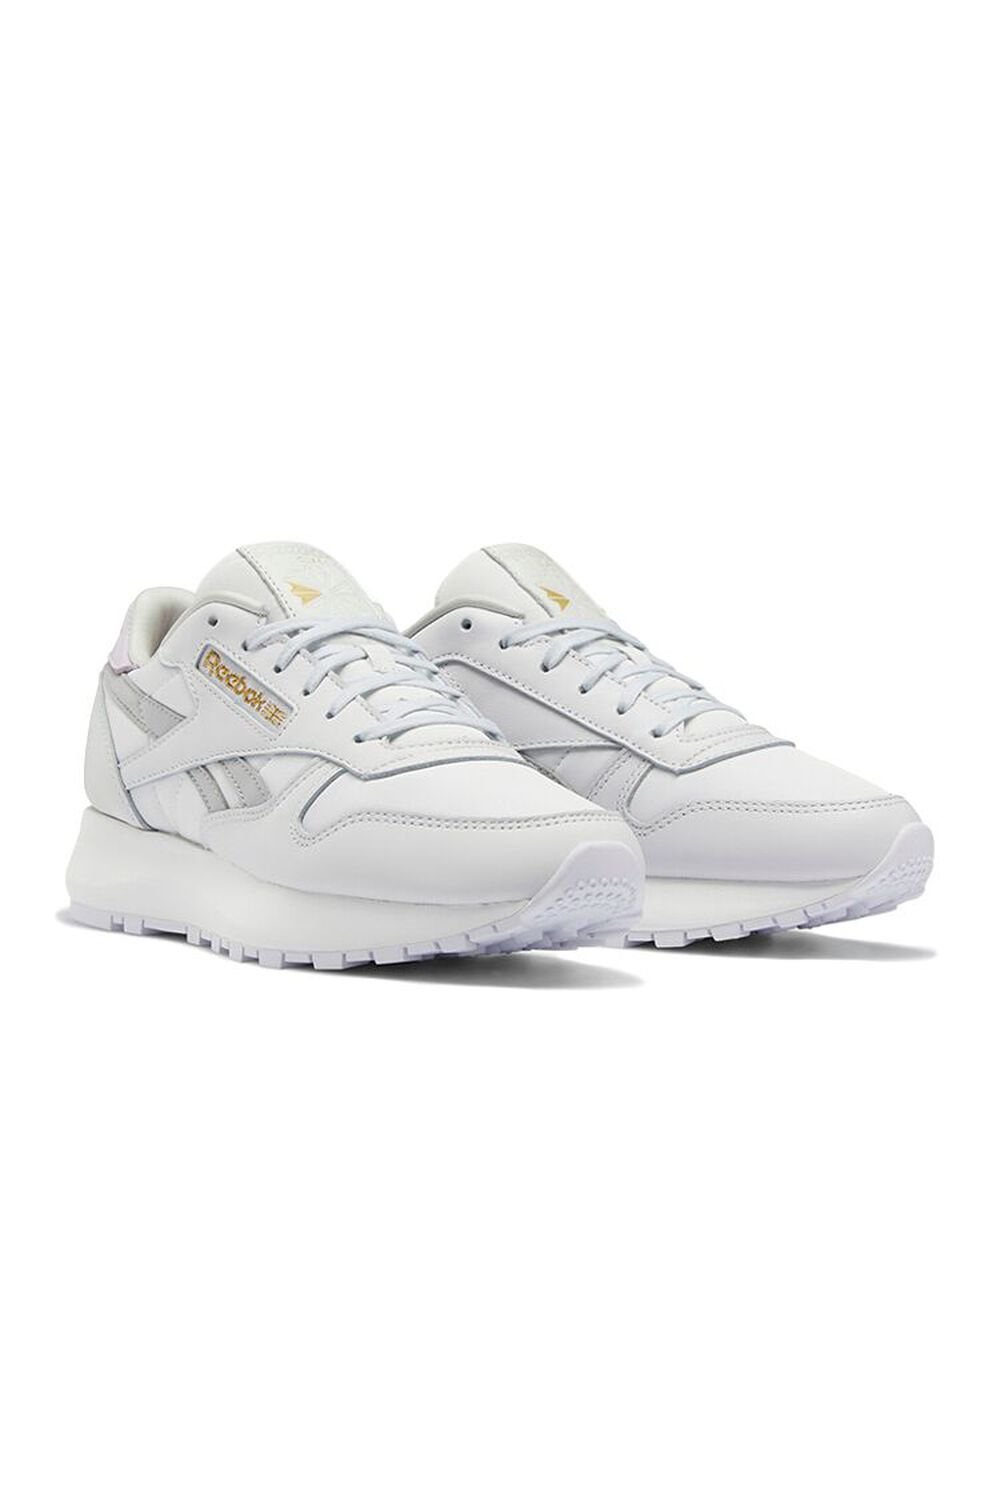 WHITE/GREY Reebok Classic Leather SP Shoes, image 1